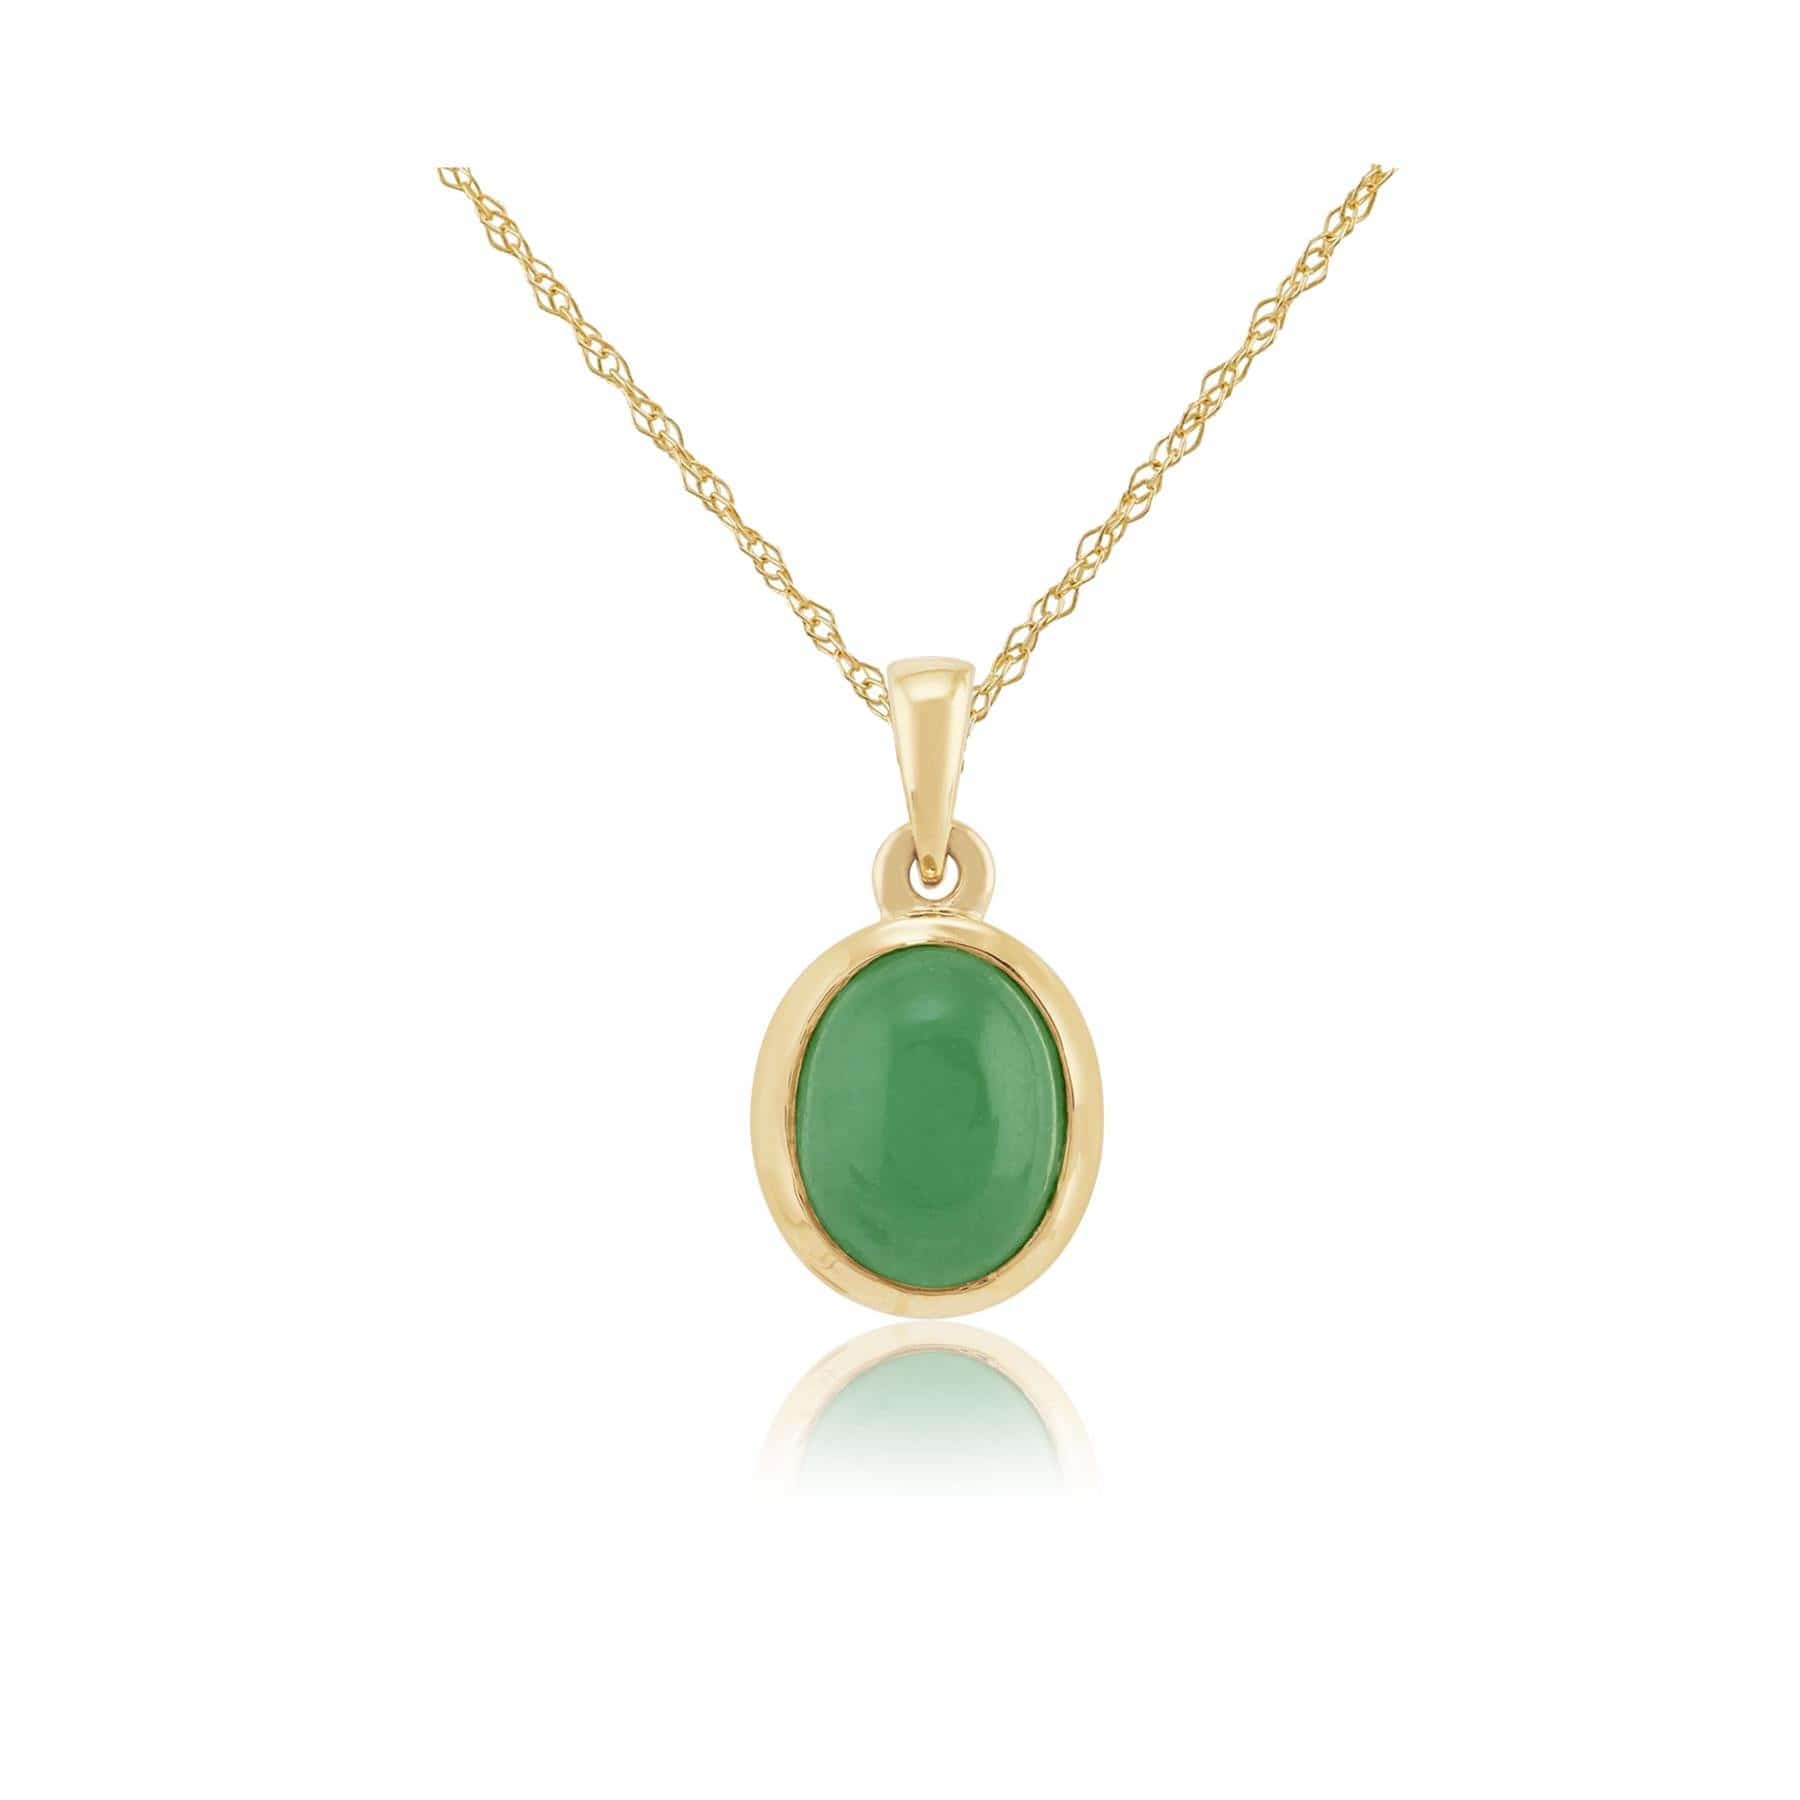 8040 Classic 2.53ct Dyed Green Jade Cabochon Pendant Necklace in 9ct Yellow Gold   1